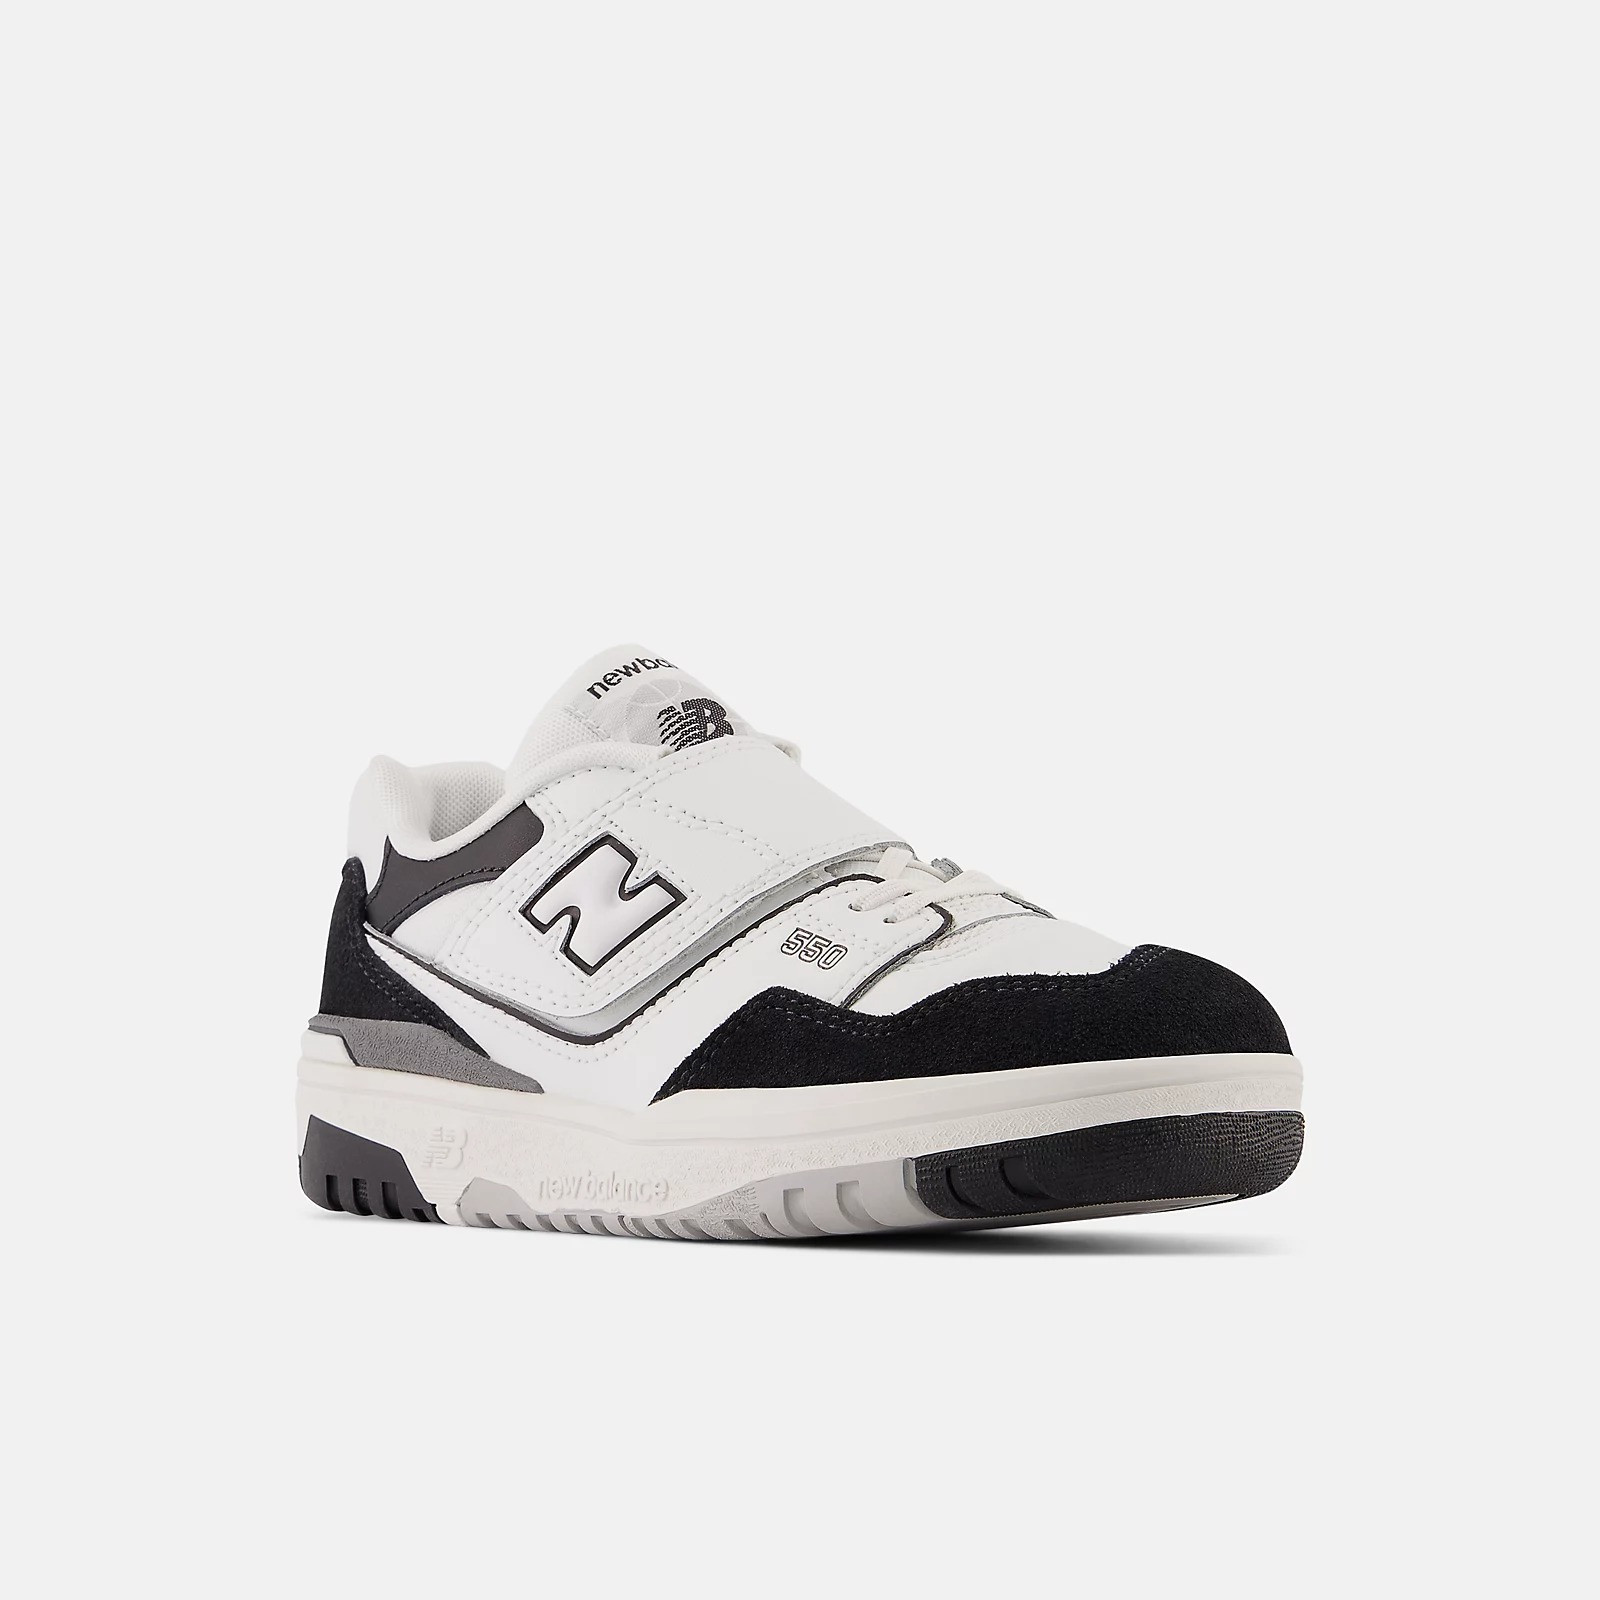 New Balance 550 PS shoes for children (Unisex from 28 to 35) - White/Black - PHB550CA